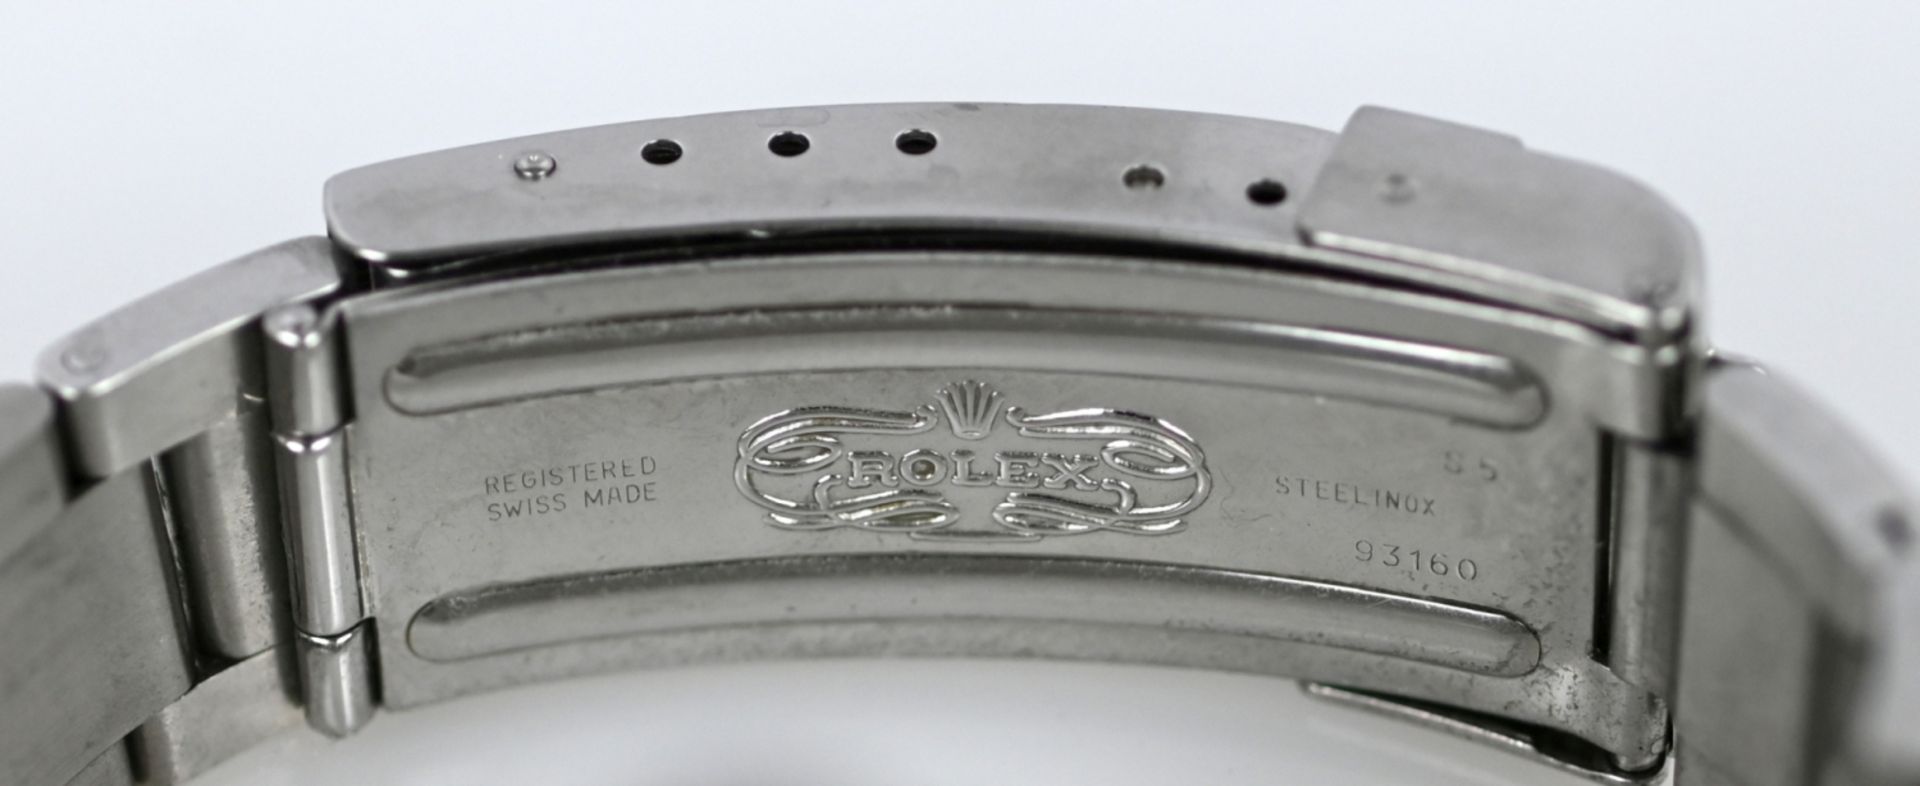 ROLEX Oyster Perpetual Date - Image 8 of 10